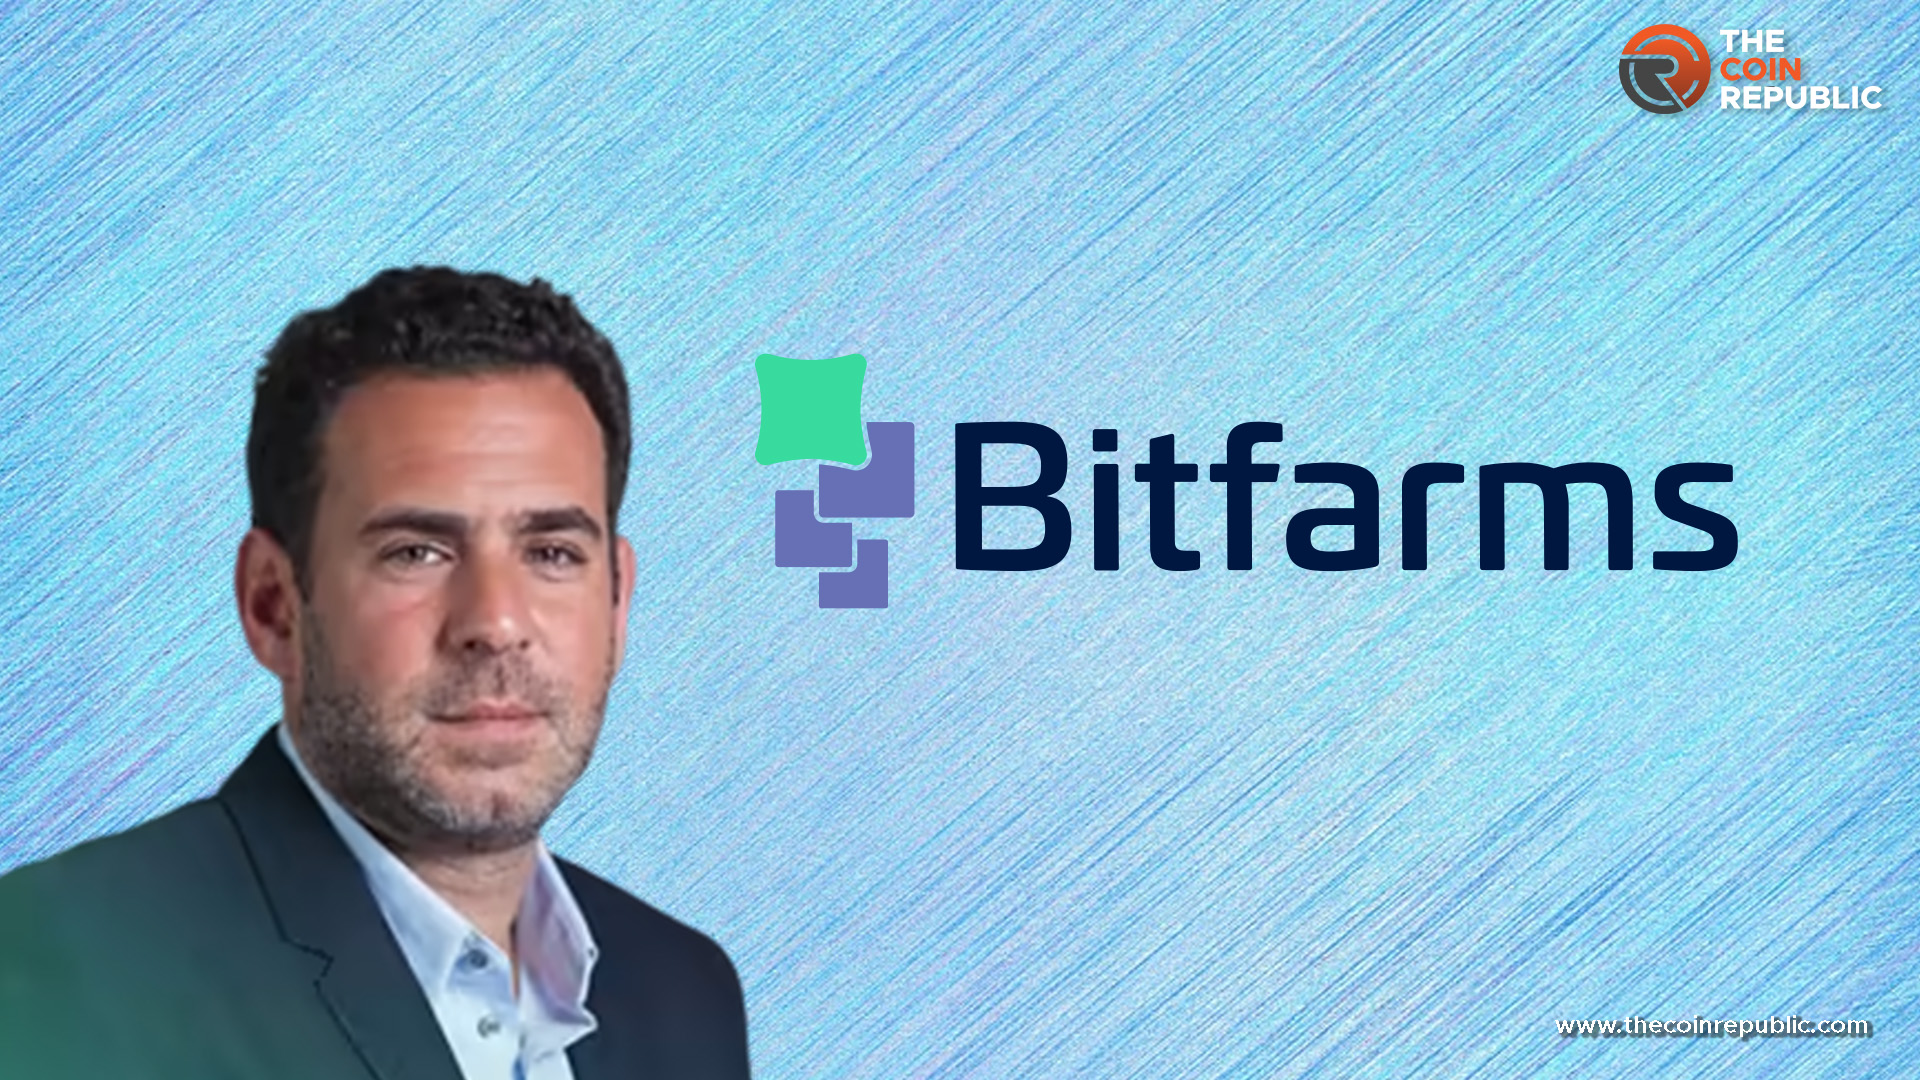 Bitfarms CEO and Co-Founder Emiliano Grodzki Leaves the Firm